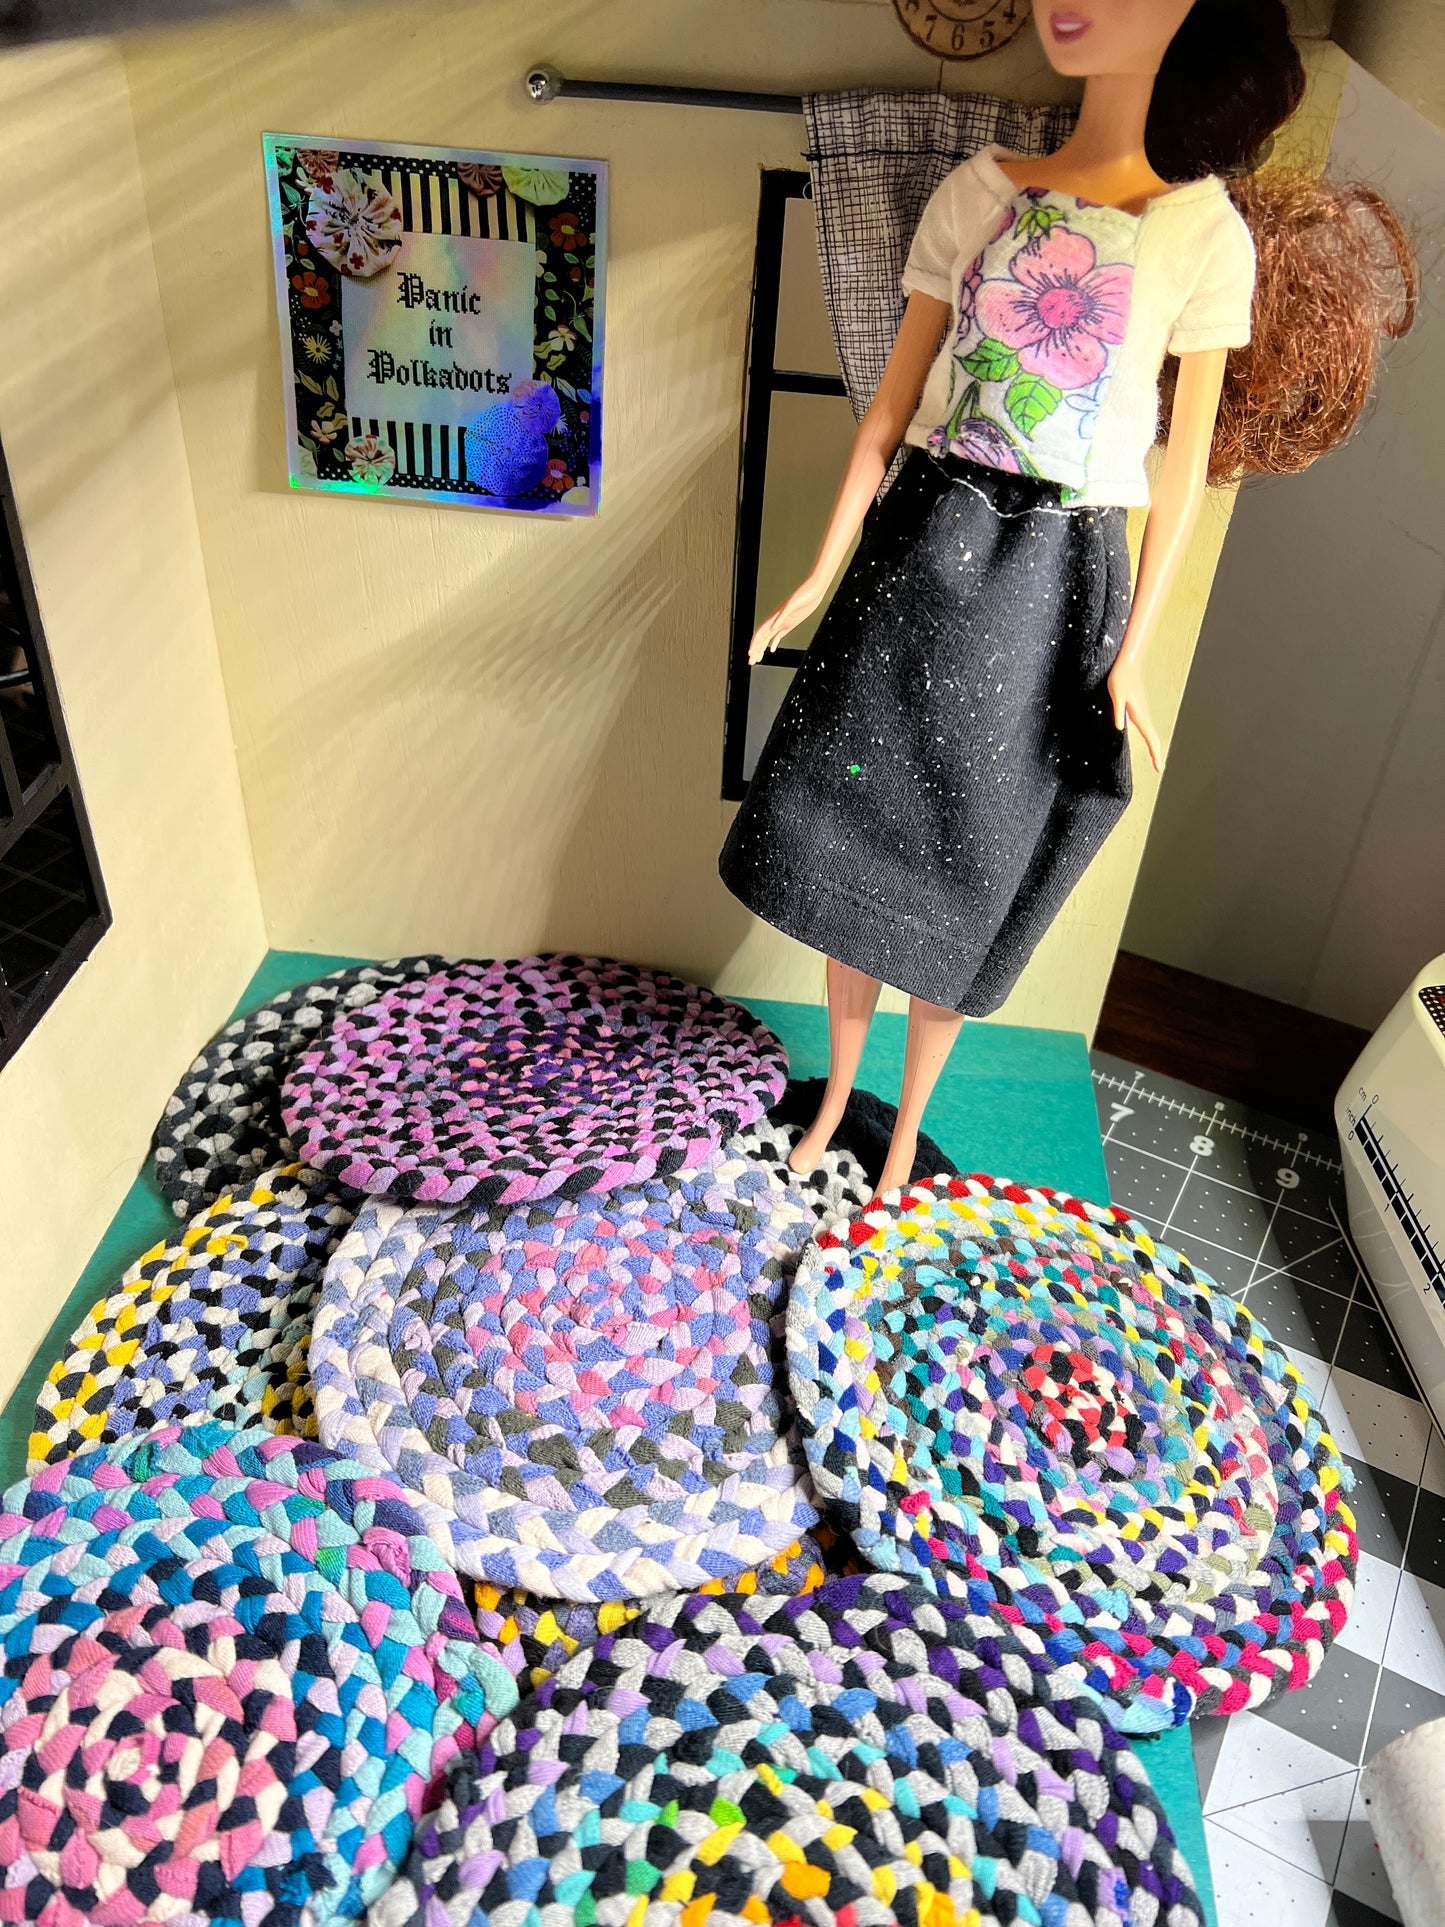 Barbie stands on top of a group of 5" miniature handbraided and handsewn rugs